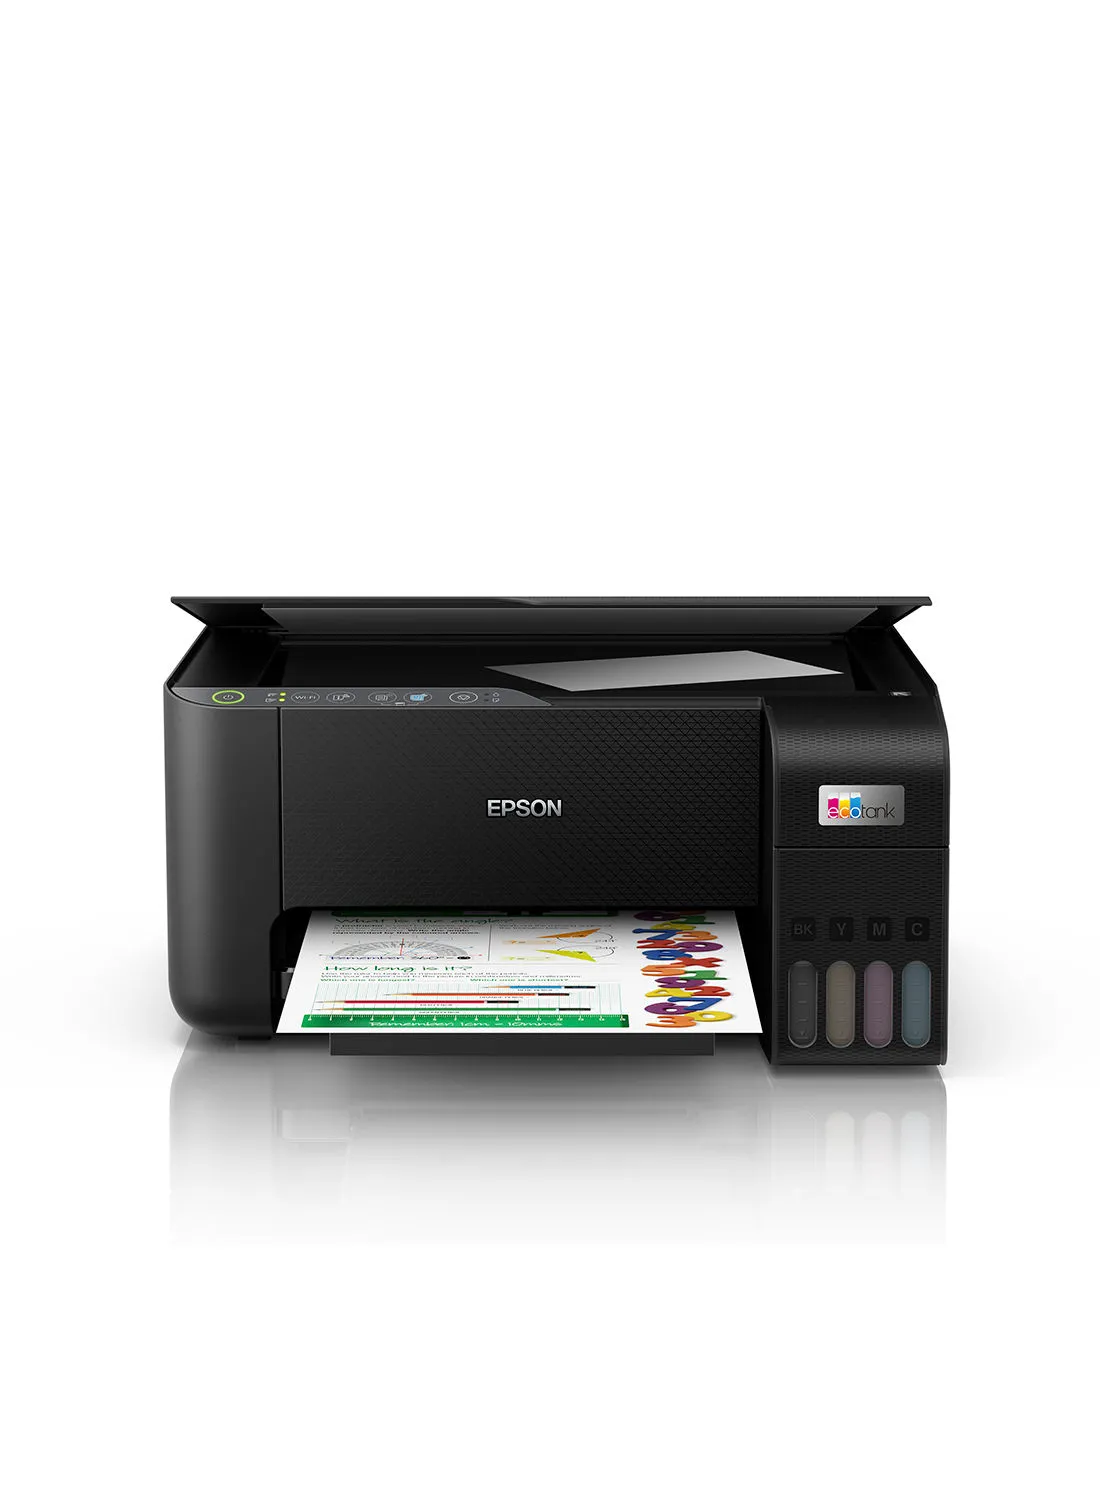 EPSON Ecotank L3250 Home Ink Tank 3-In-1 Colour Printer With Wifi And Smartpanel App Connectivity Black